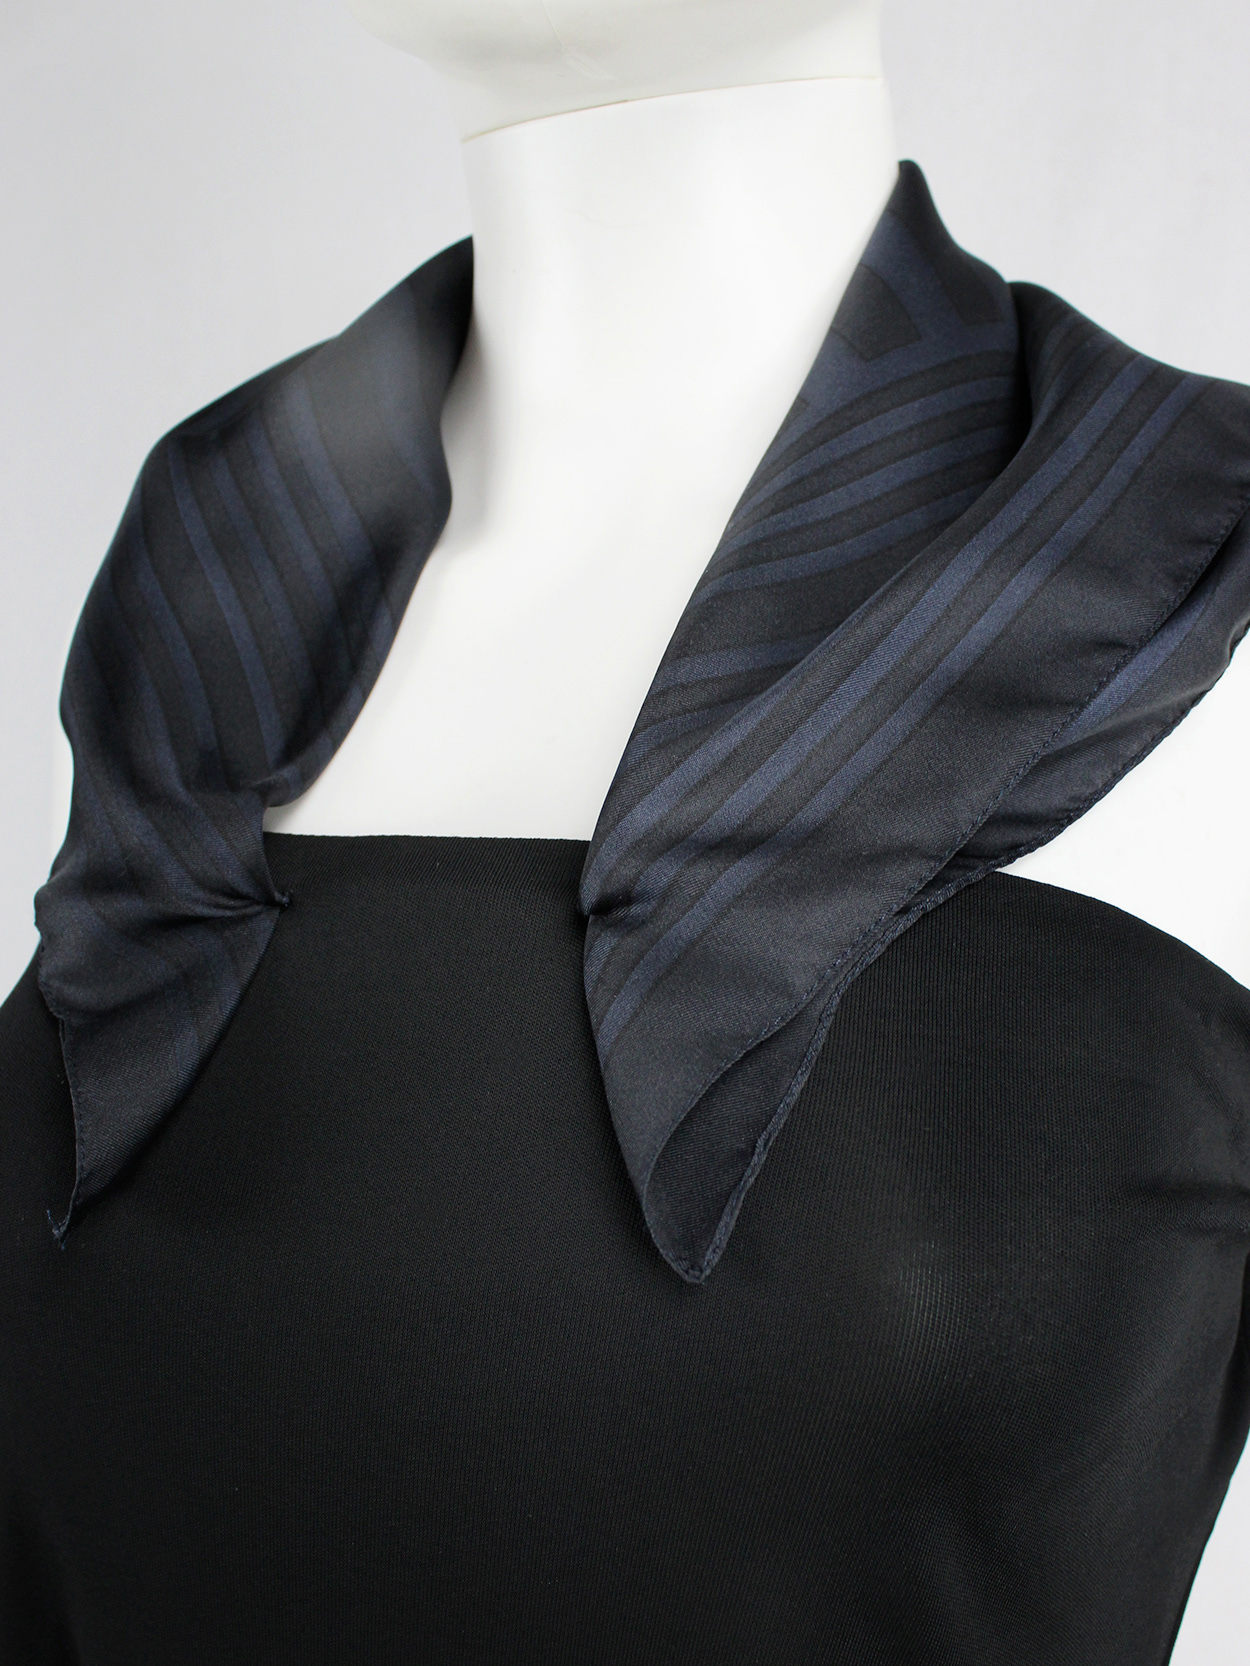 Maison Martin Margiela black backless top with blue scarf collar ...